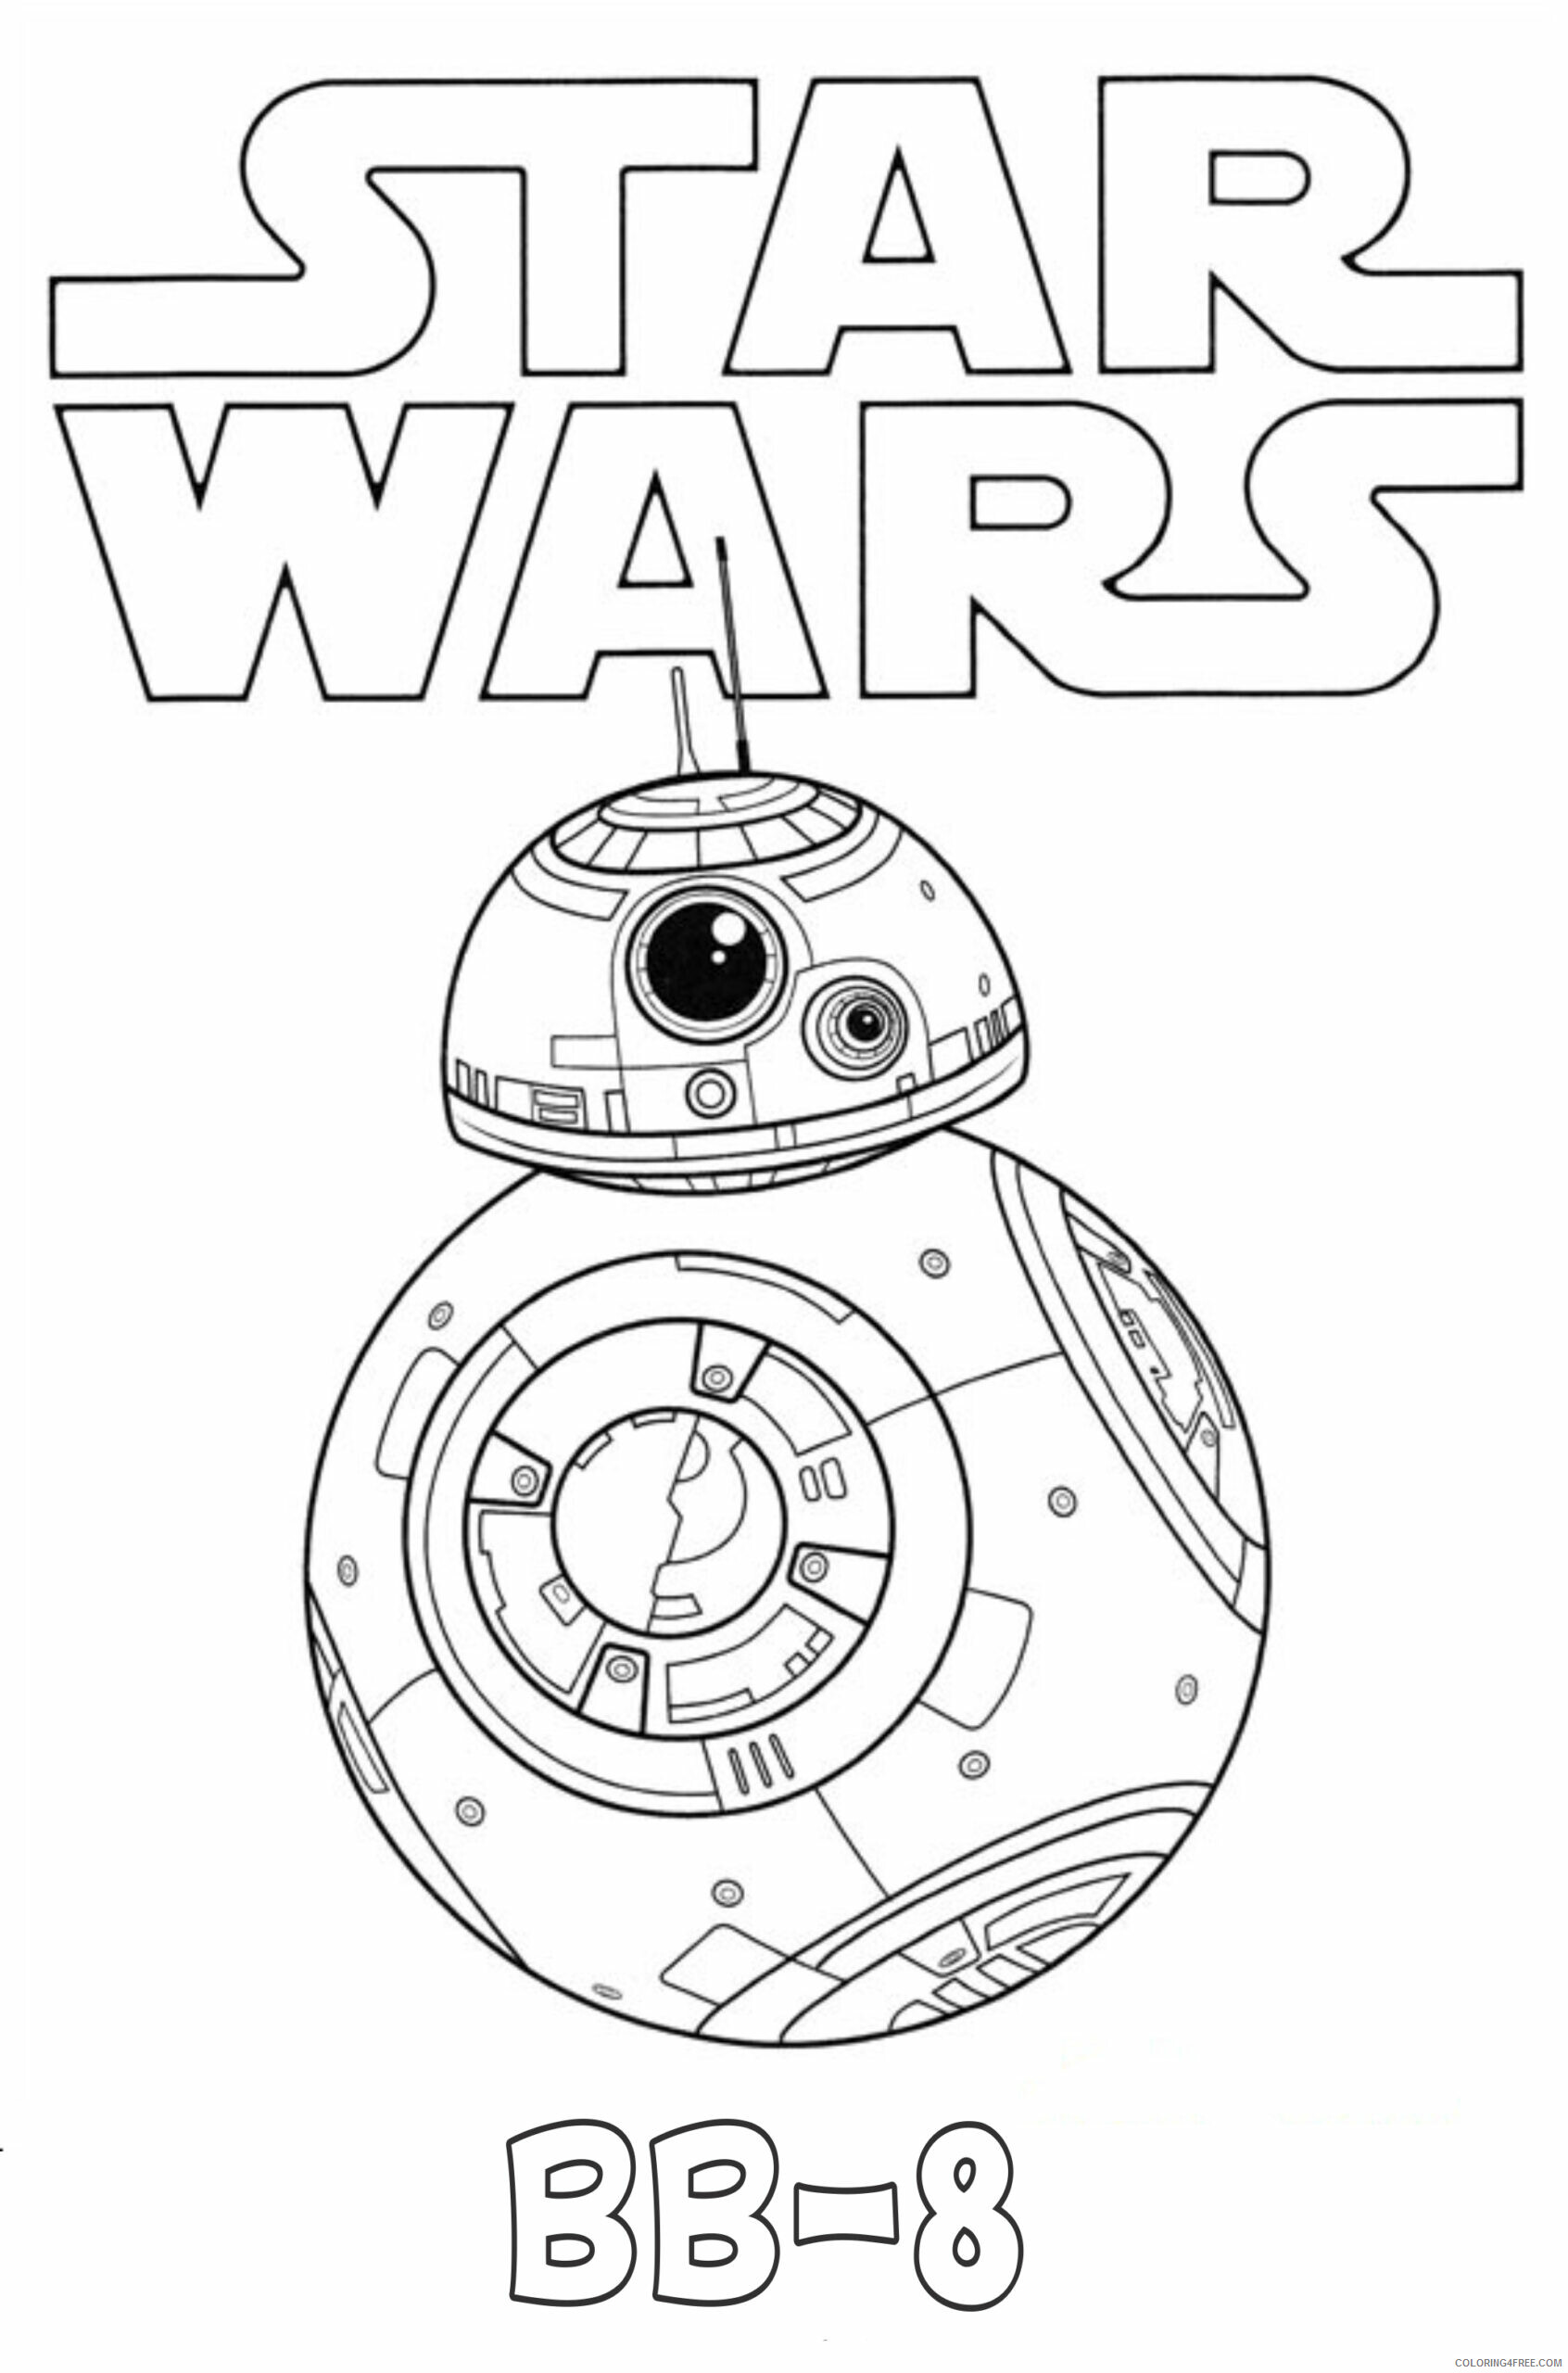 Star Wars Coloring Pages TV Film Star Wars BB 8 Printable 2020 07949 Coloring4free